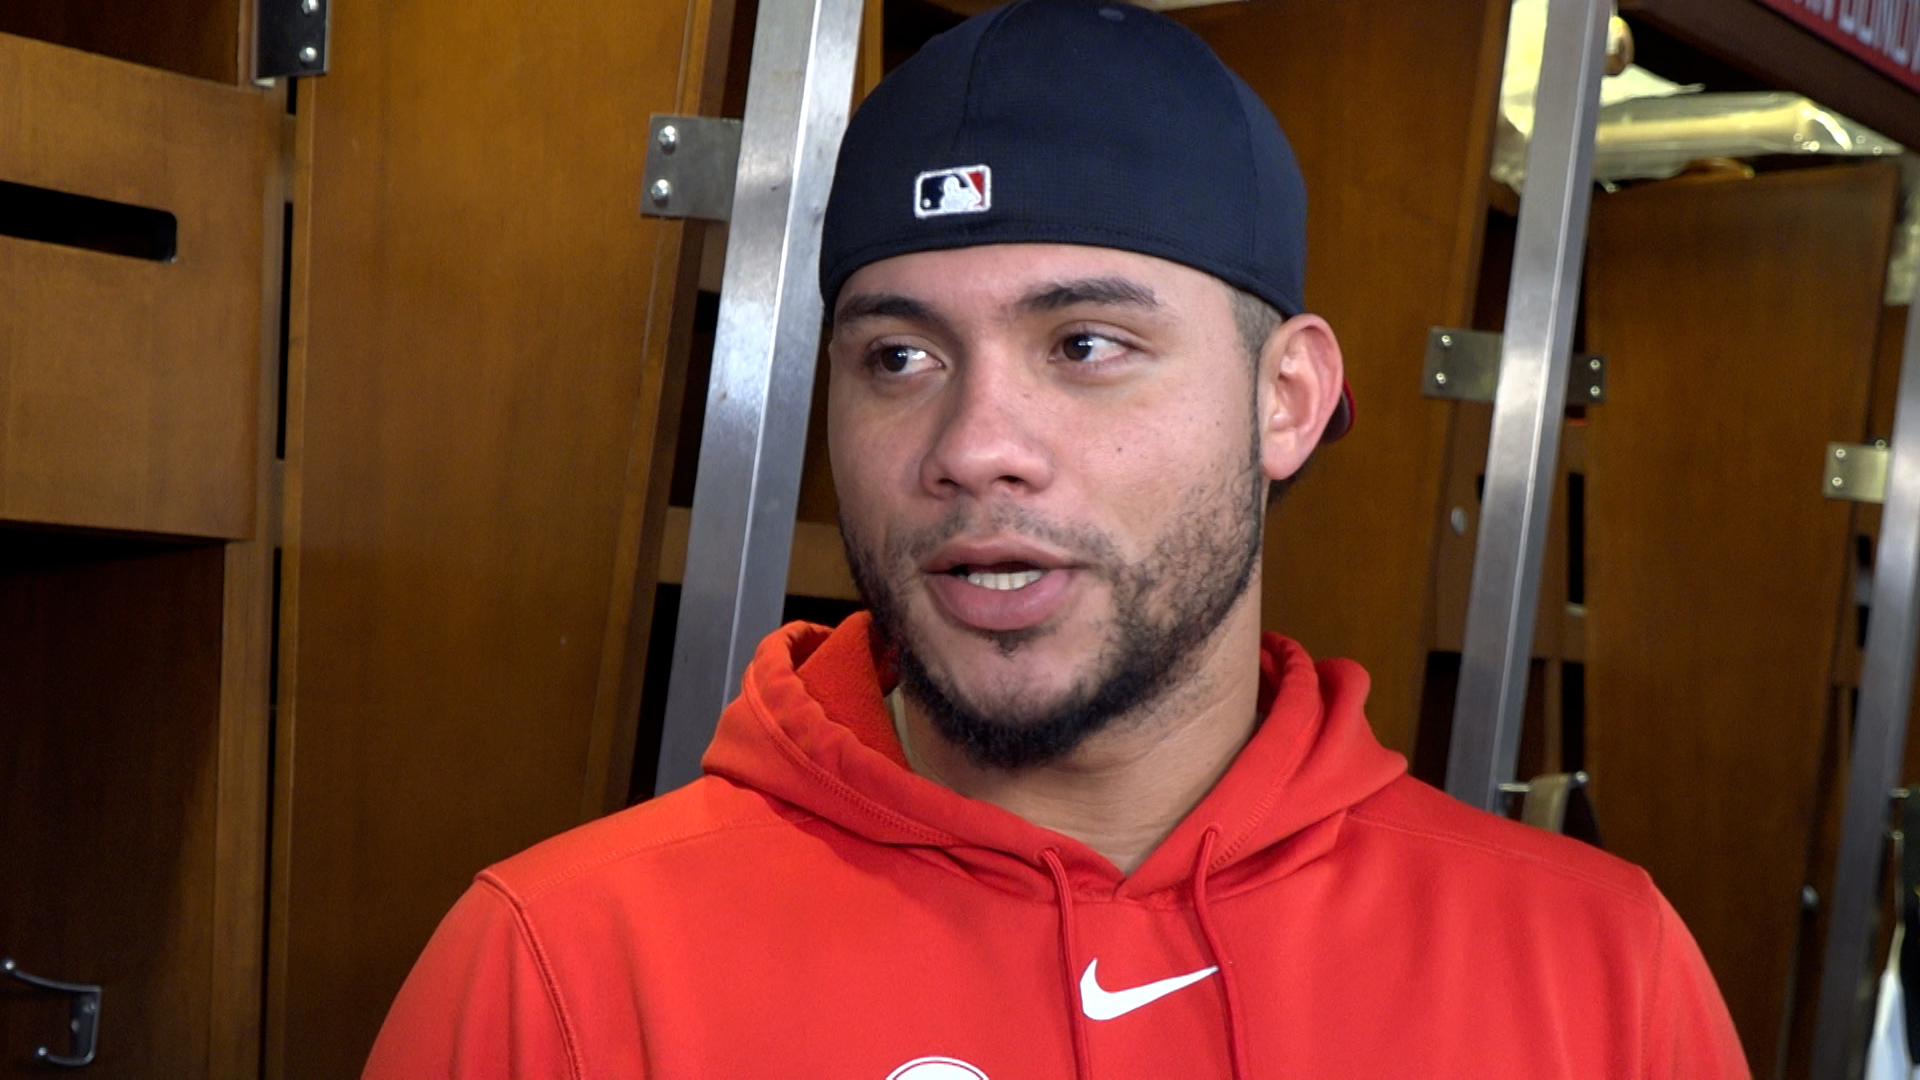 St. Louis Cardinals catcher Willson Contreras met with reporters before Friday night's game against the Boston Red Sox.